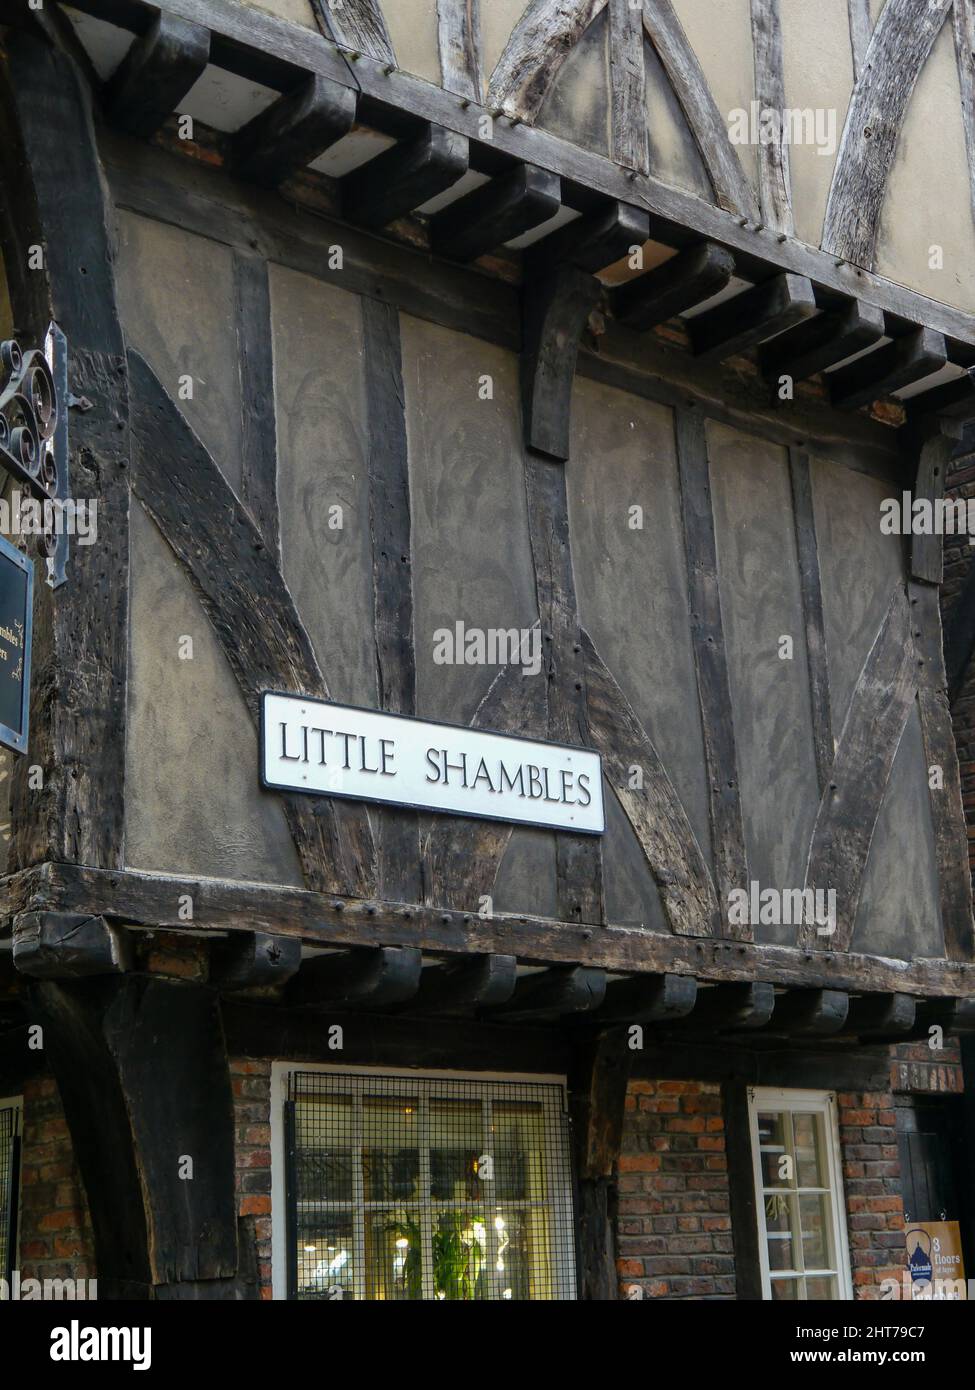 A street sign for Little Shambles in York, England Stock Photo